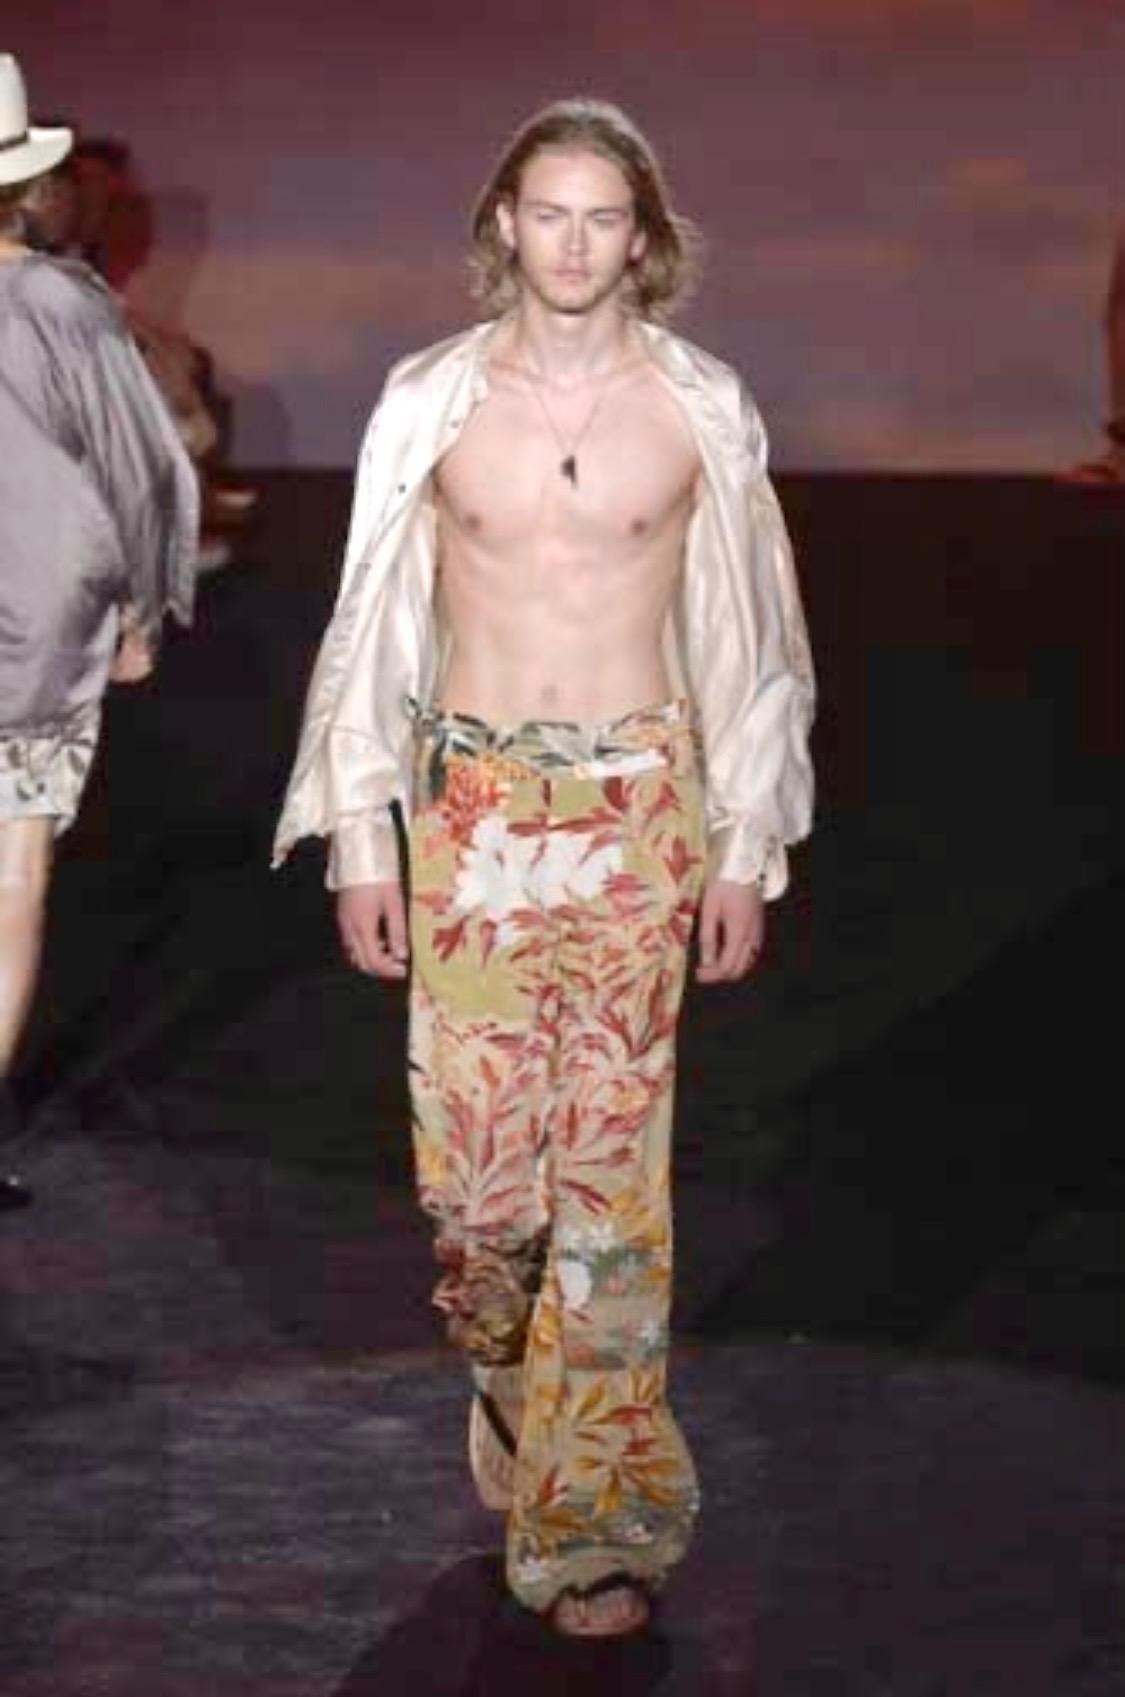 Presenting green floral Gucci pants, designed by Tom Ford. From chinoiserie inspired Spring/Summer 2003 collection, this print debuted on the men's runway and features large colorful lotuses. The pants are constructed of light silk and are made